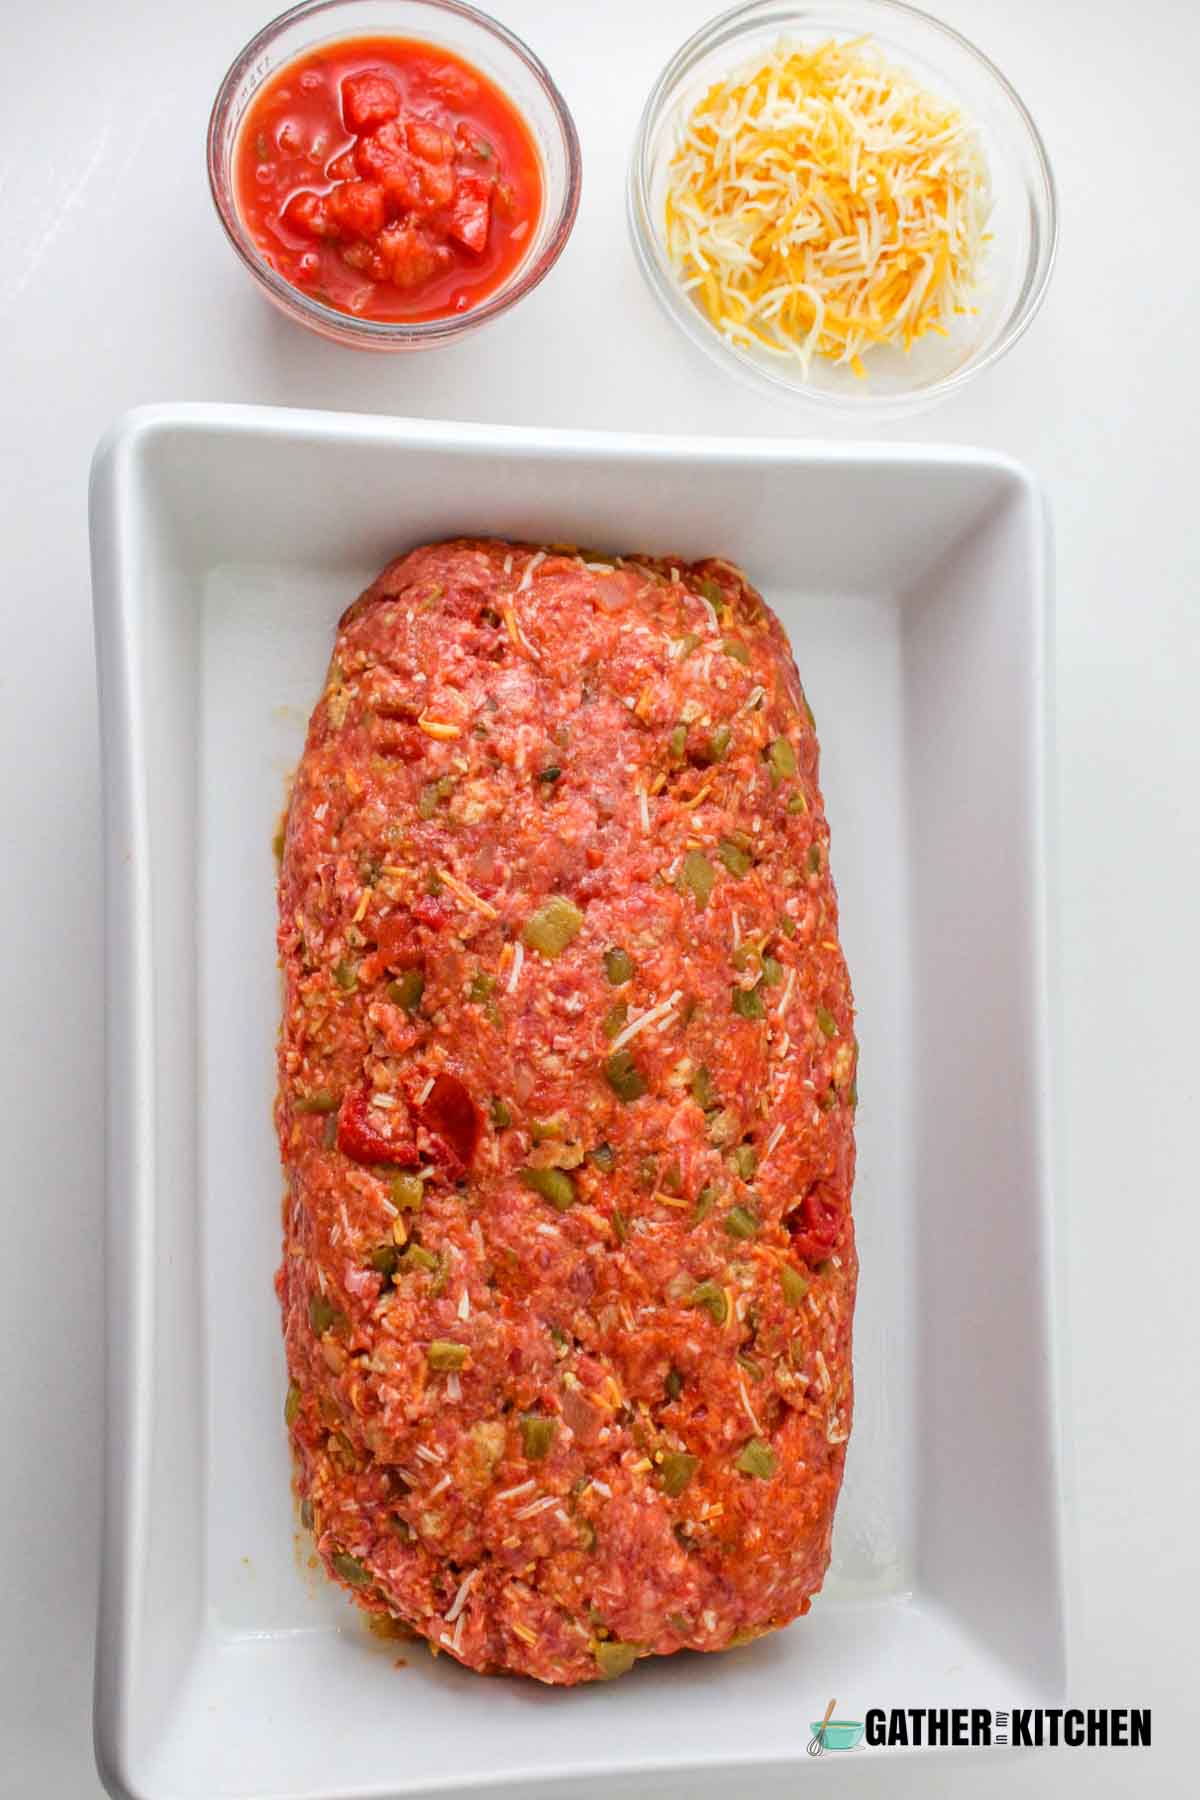 Meatloaf formed into log and placed in center of a casserole dish.